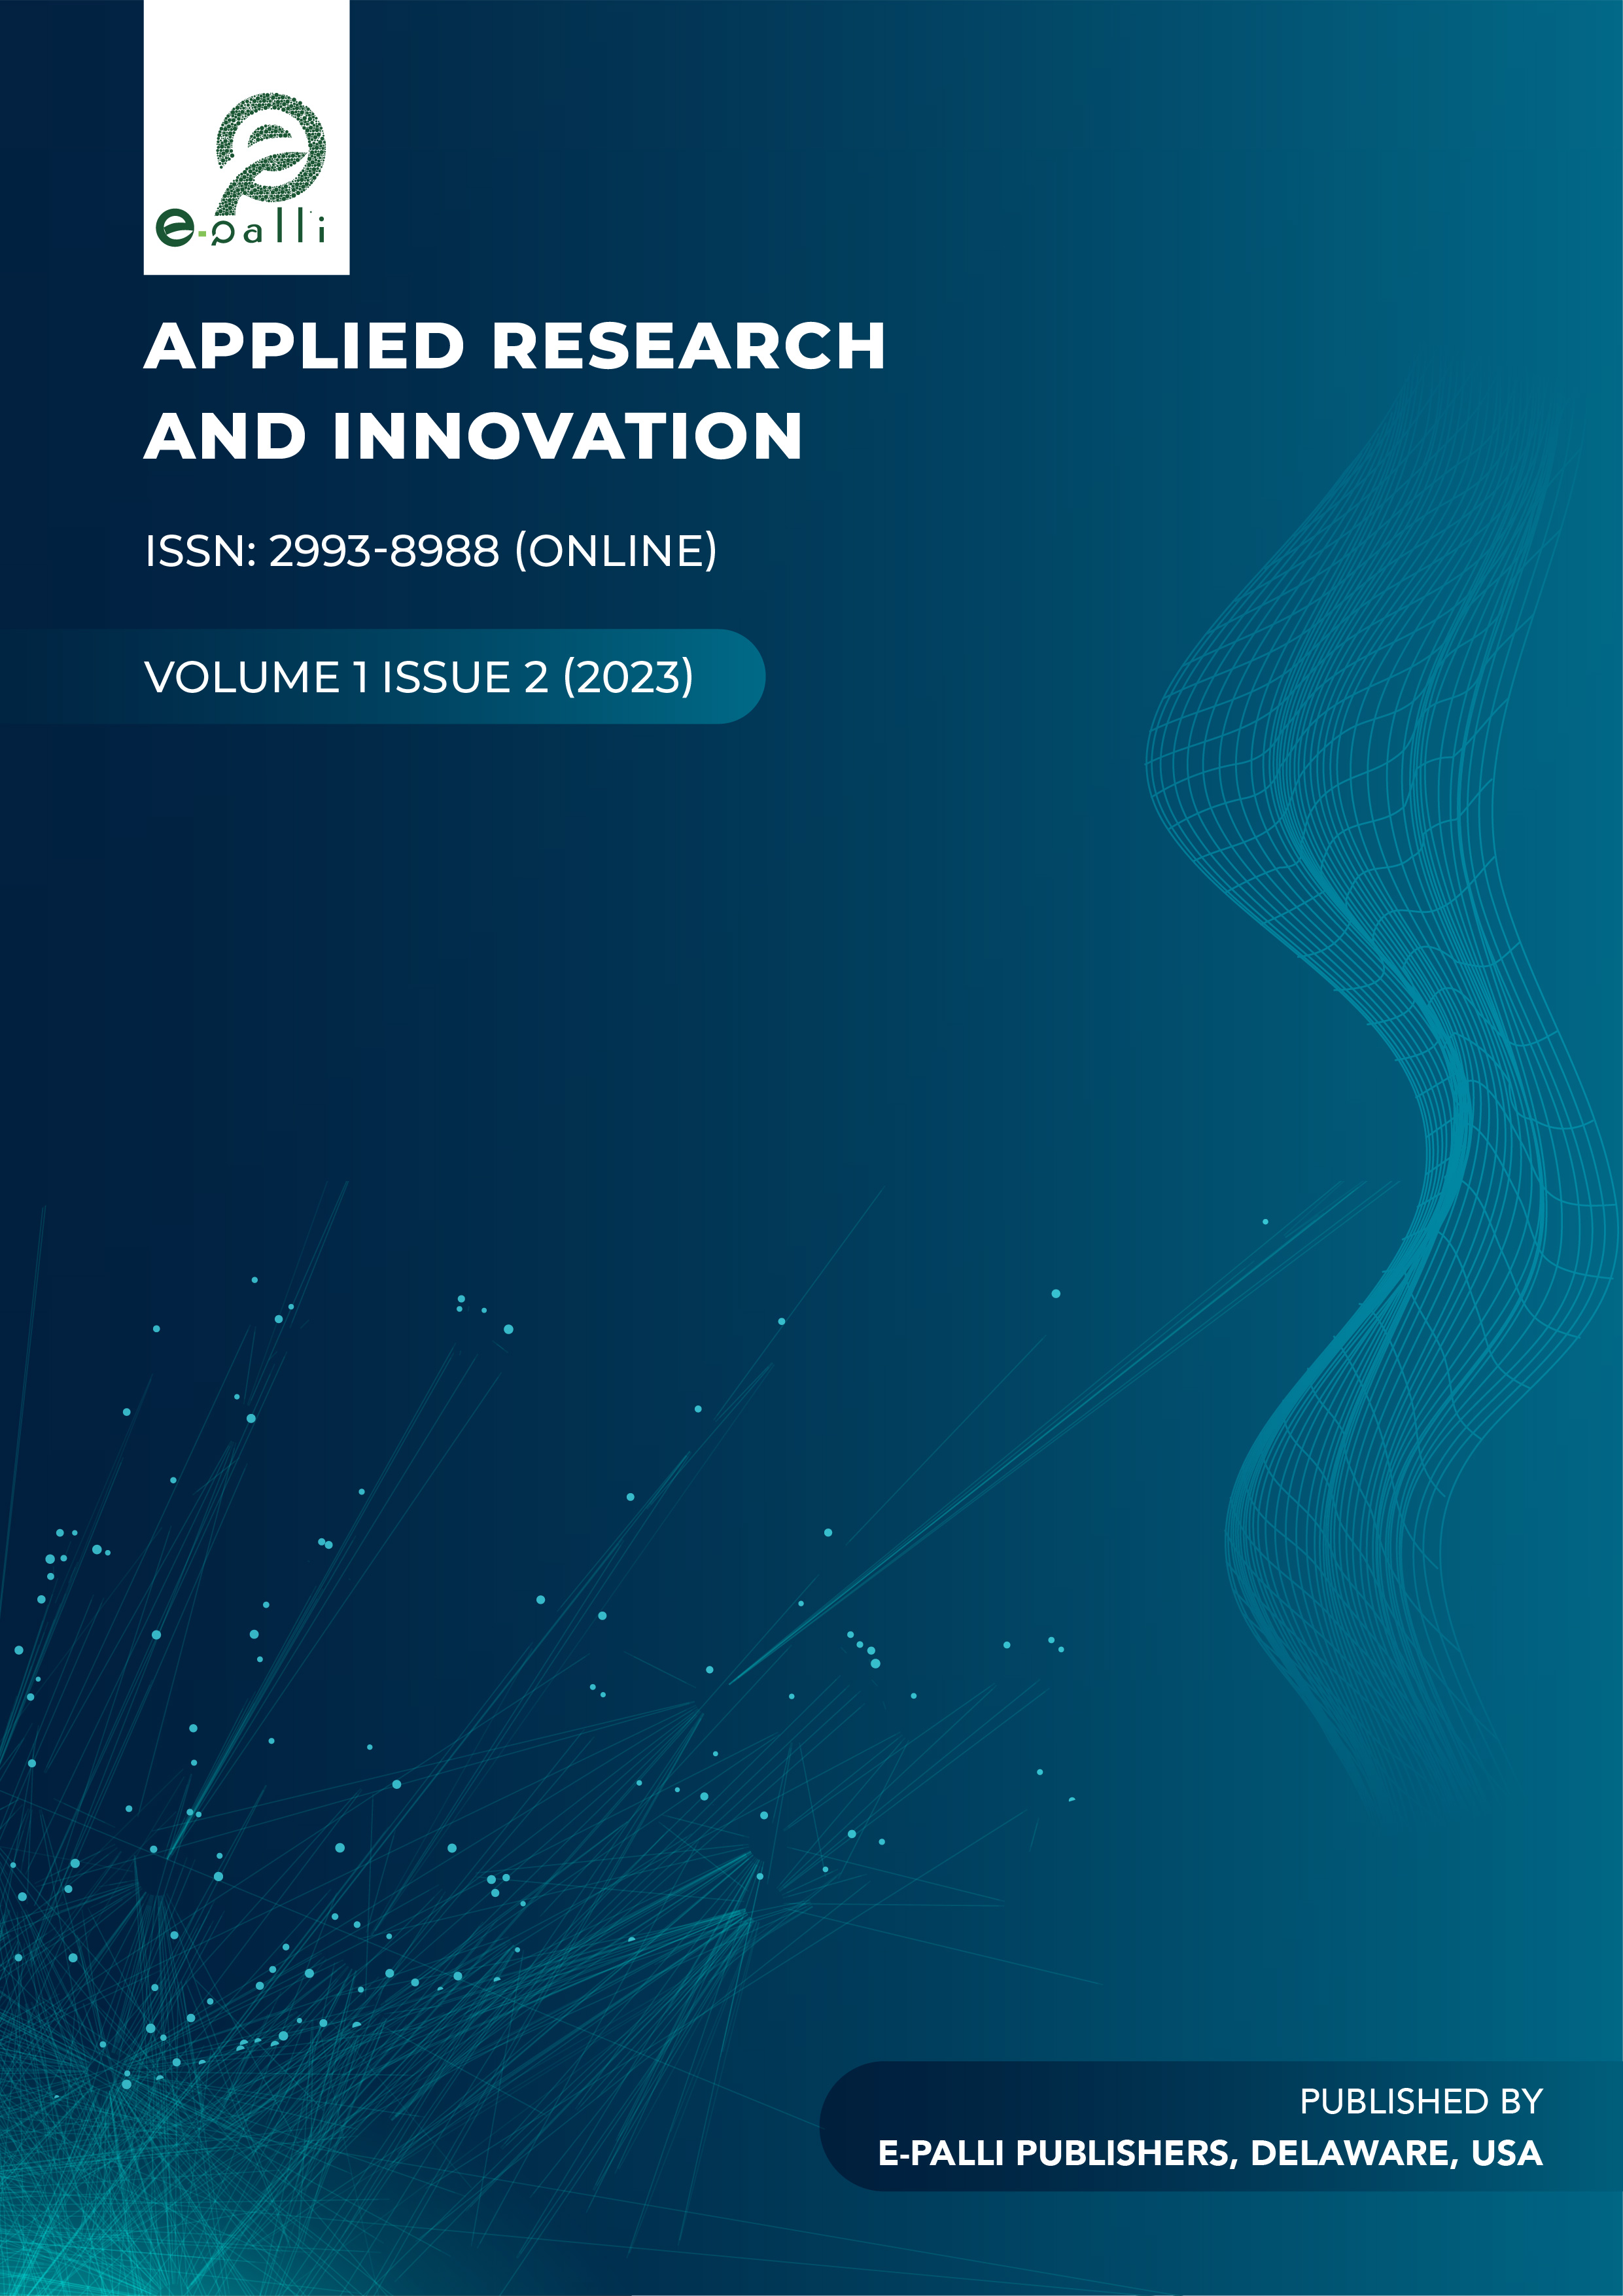                     View Vol. 1 No. 2 (2023): Applied Research and Innovation
                